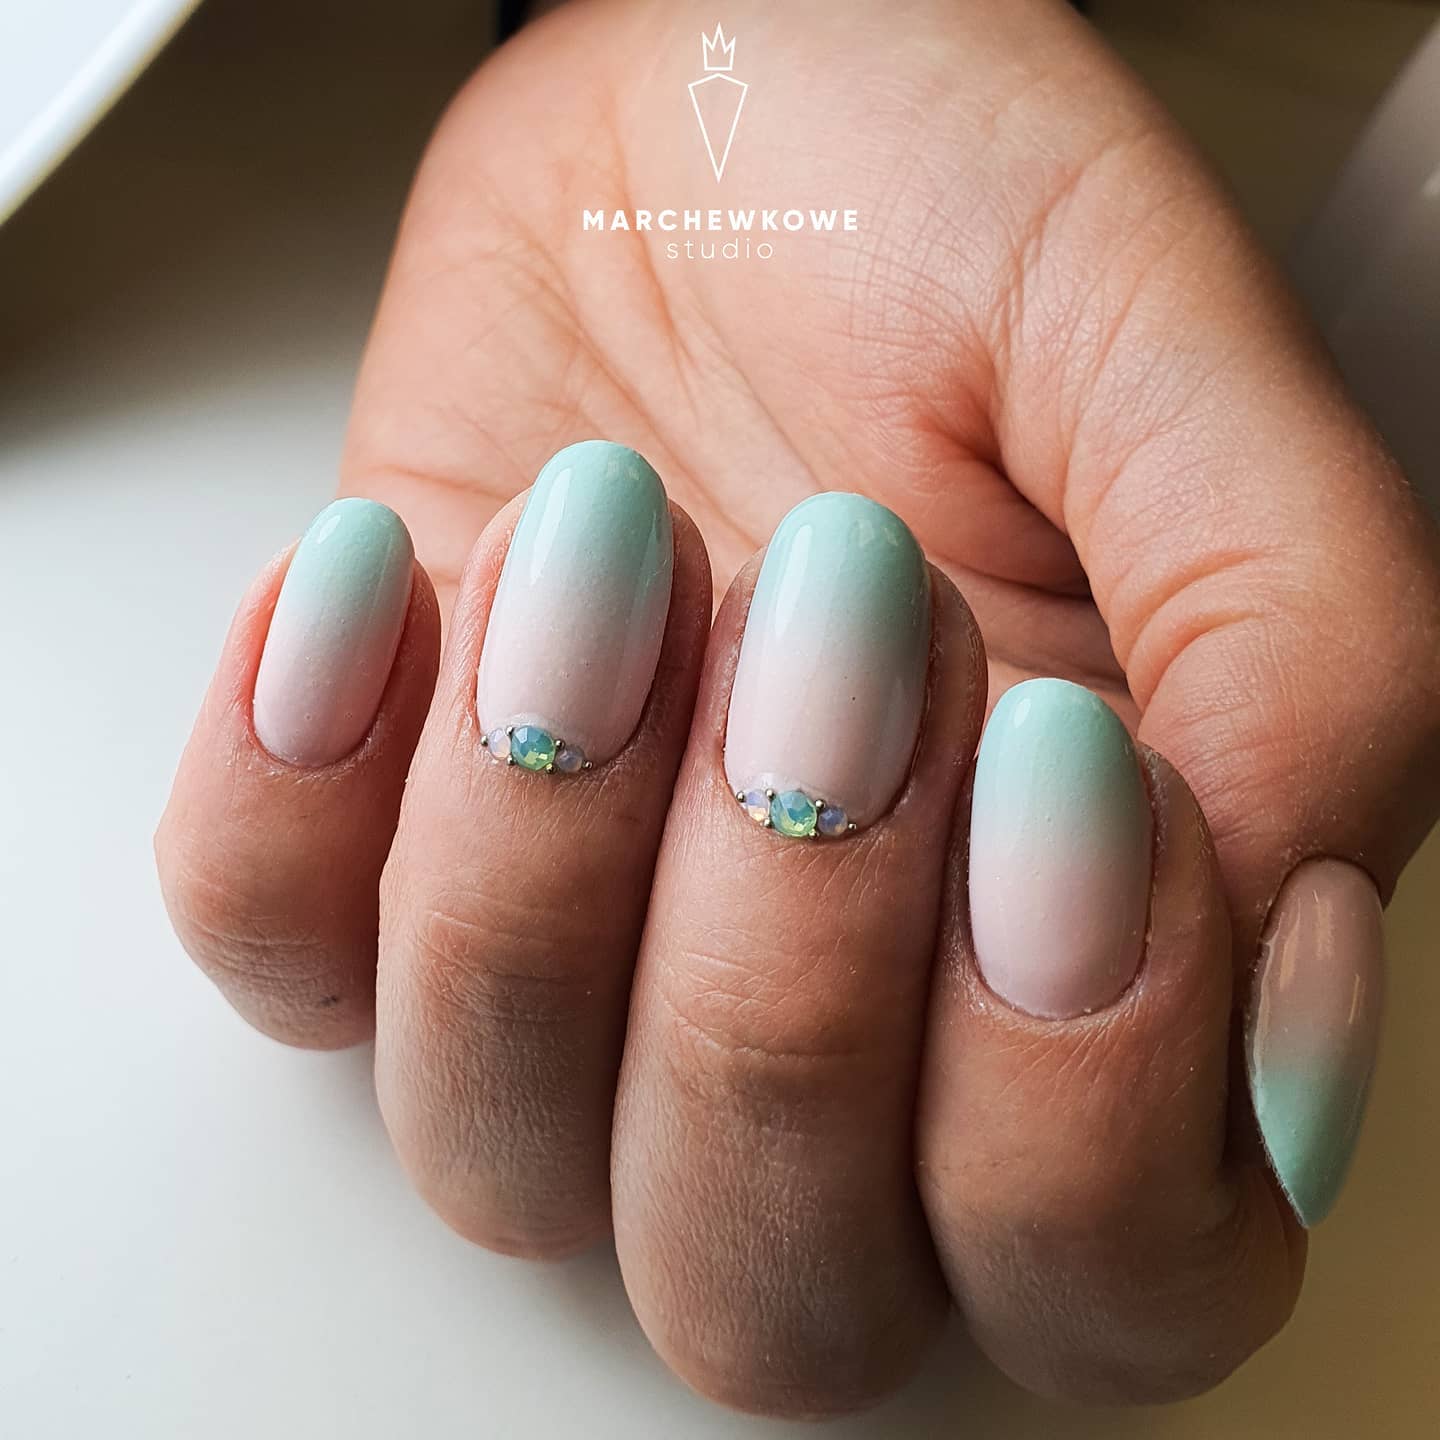 Light green but with a gemstone pop, this manicure is for women who enjoy pastel shades and elegant ideas.